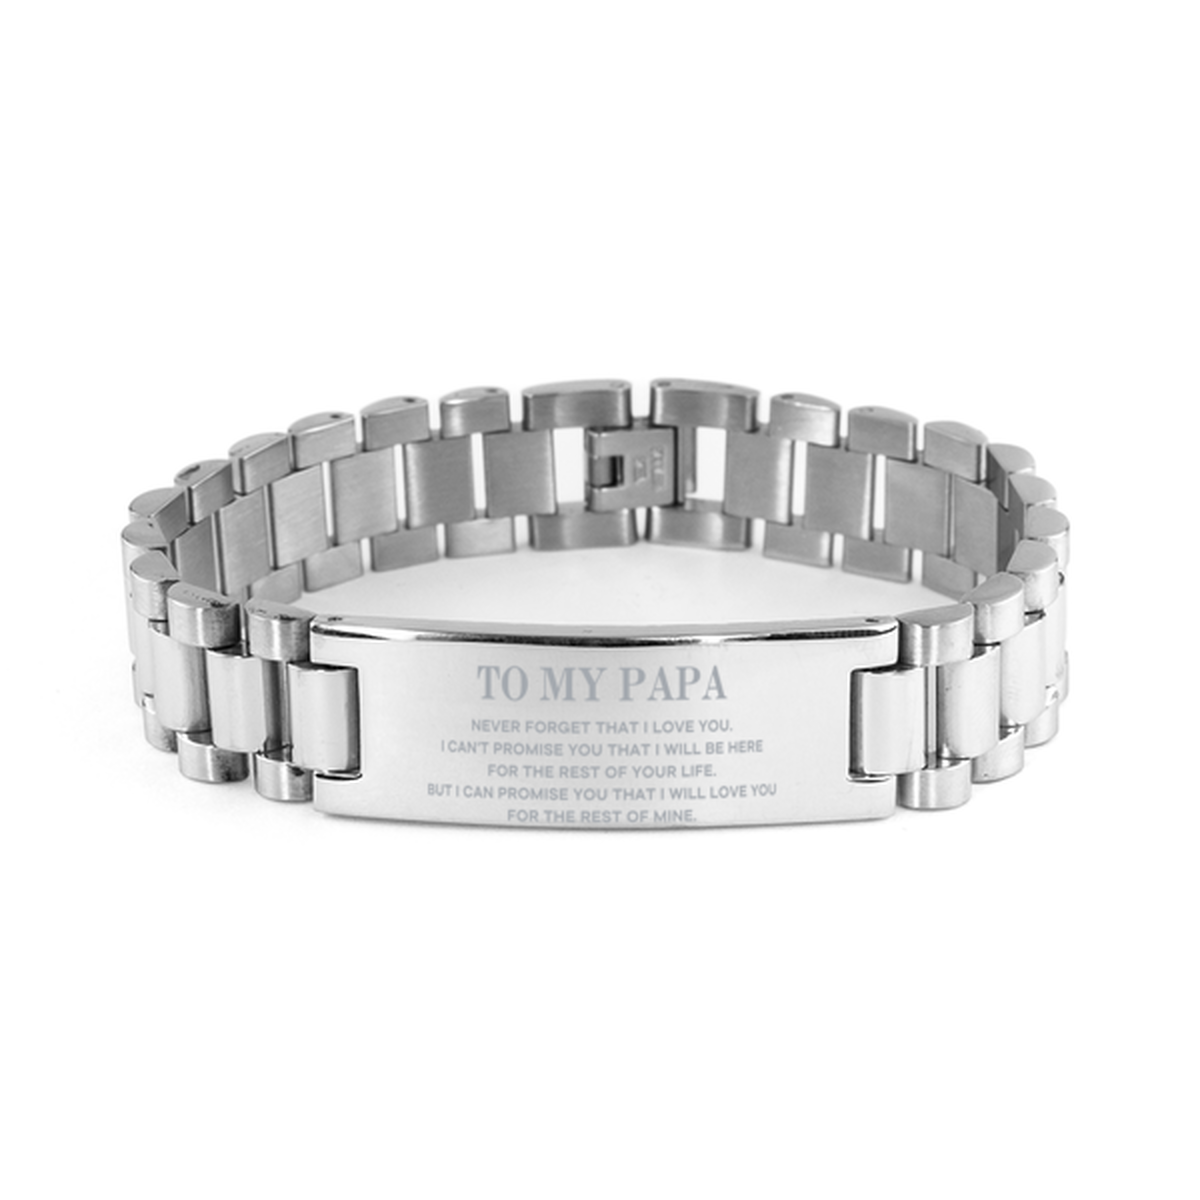 To My Papa Gifts, I will love you for the rest of mine, Love Papa Bracelet, Birthday Christmas Unique Ladder Stainless Steel Bracelet For Papa